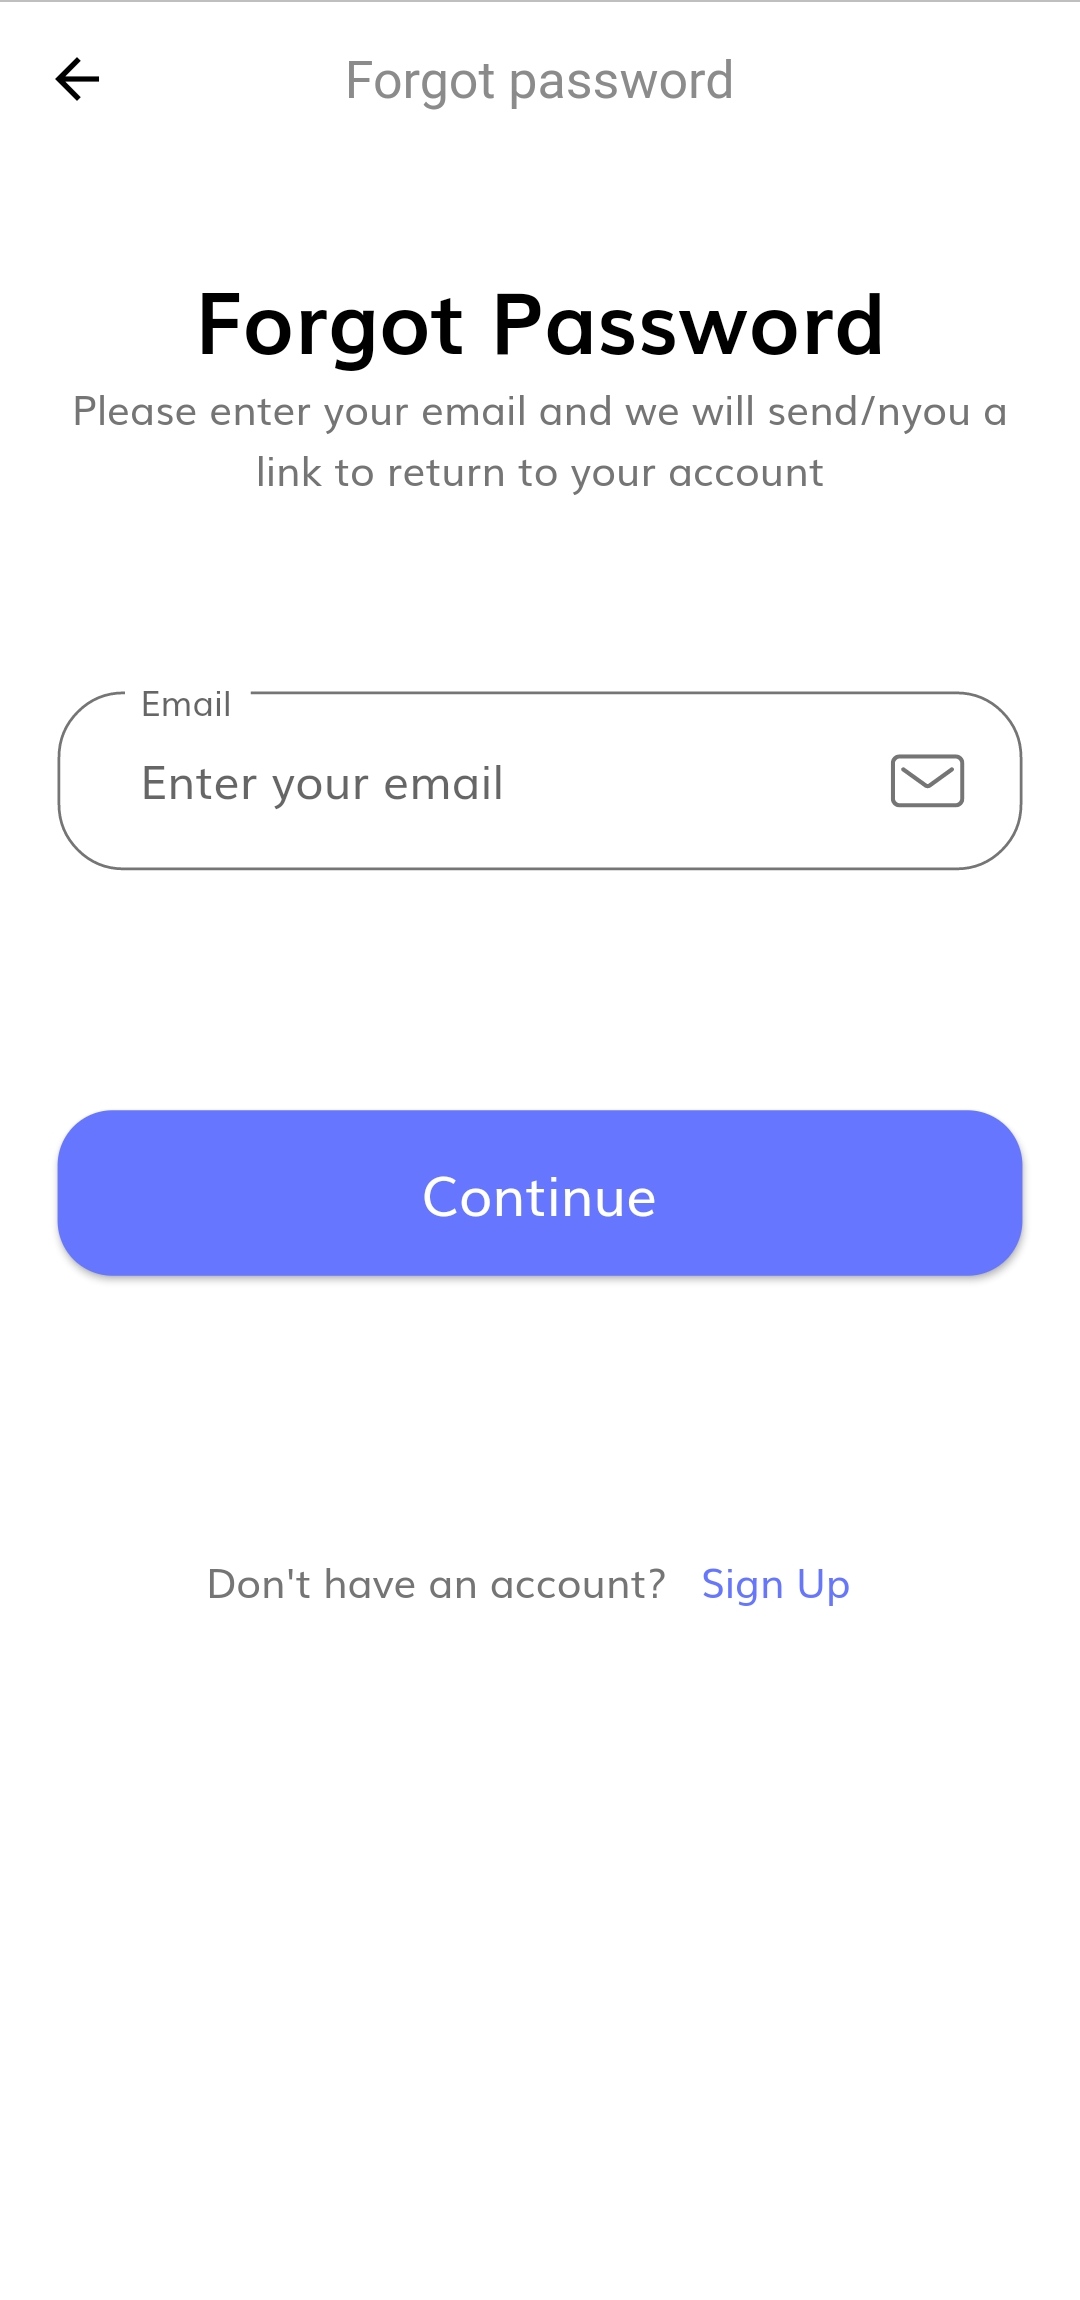 A full E-commerce app with nice UI consists of on-boarding, login, sign-up, home